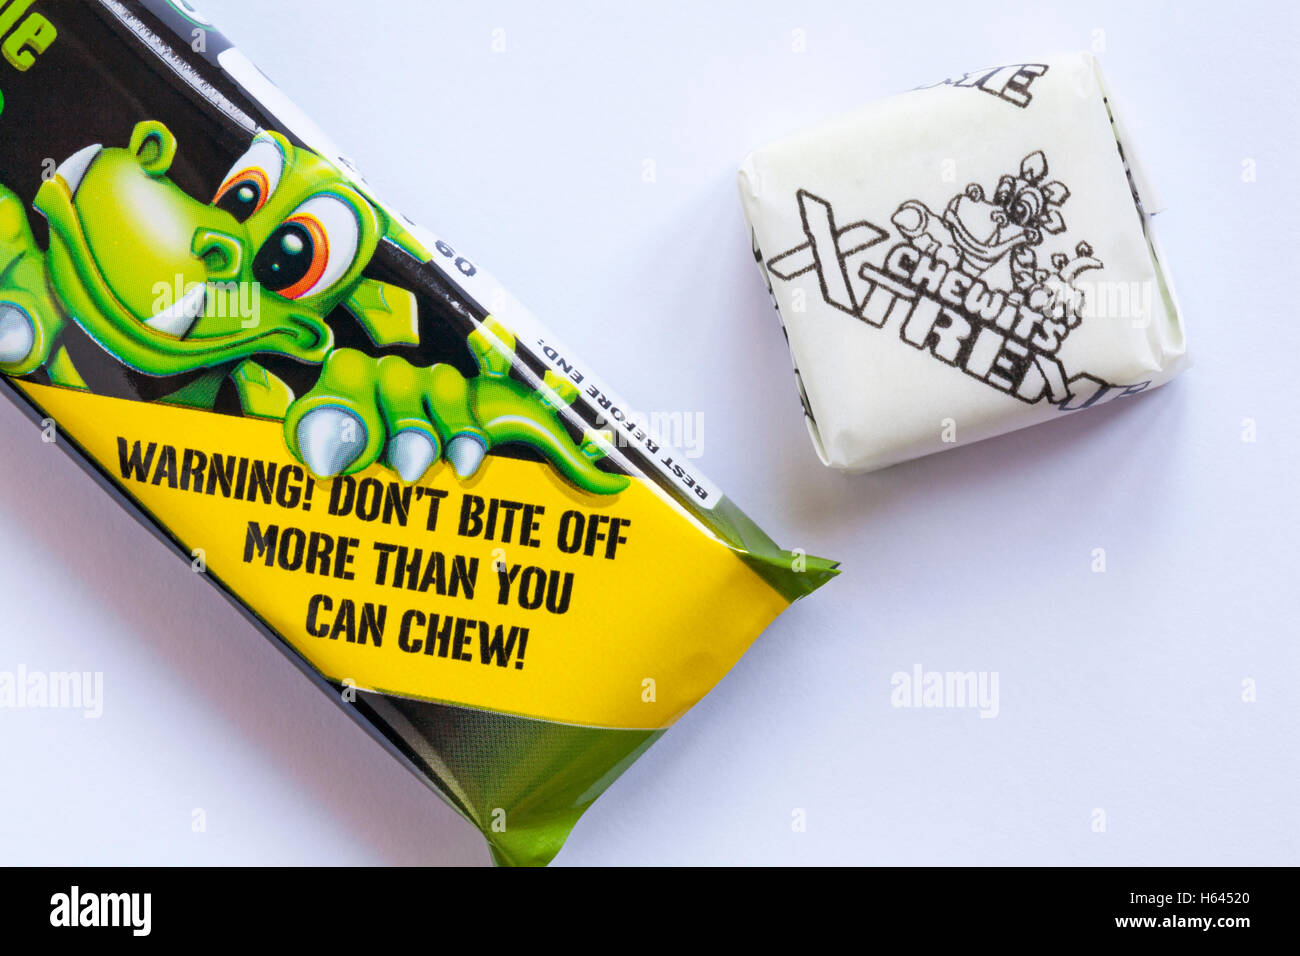 Warning don't bite off more than you can chew - detail on pack of Xtreme Chewits extremely sour apple with one removed Stock Photo